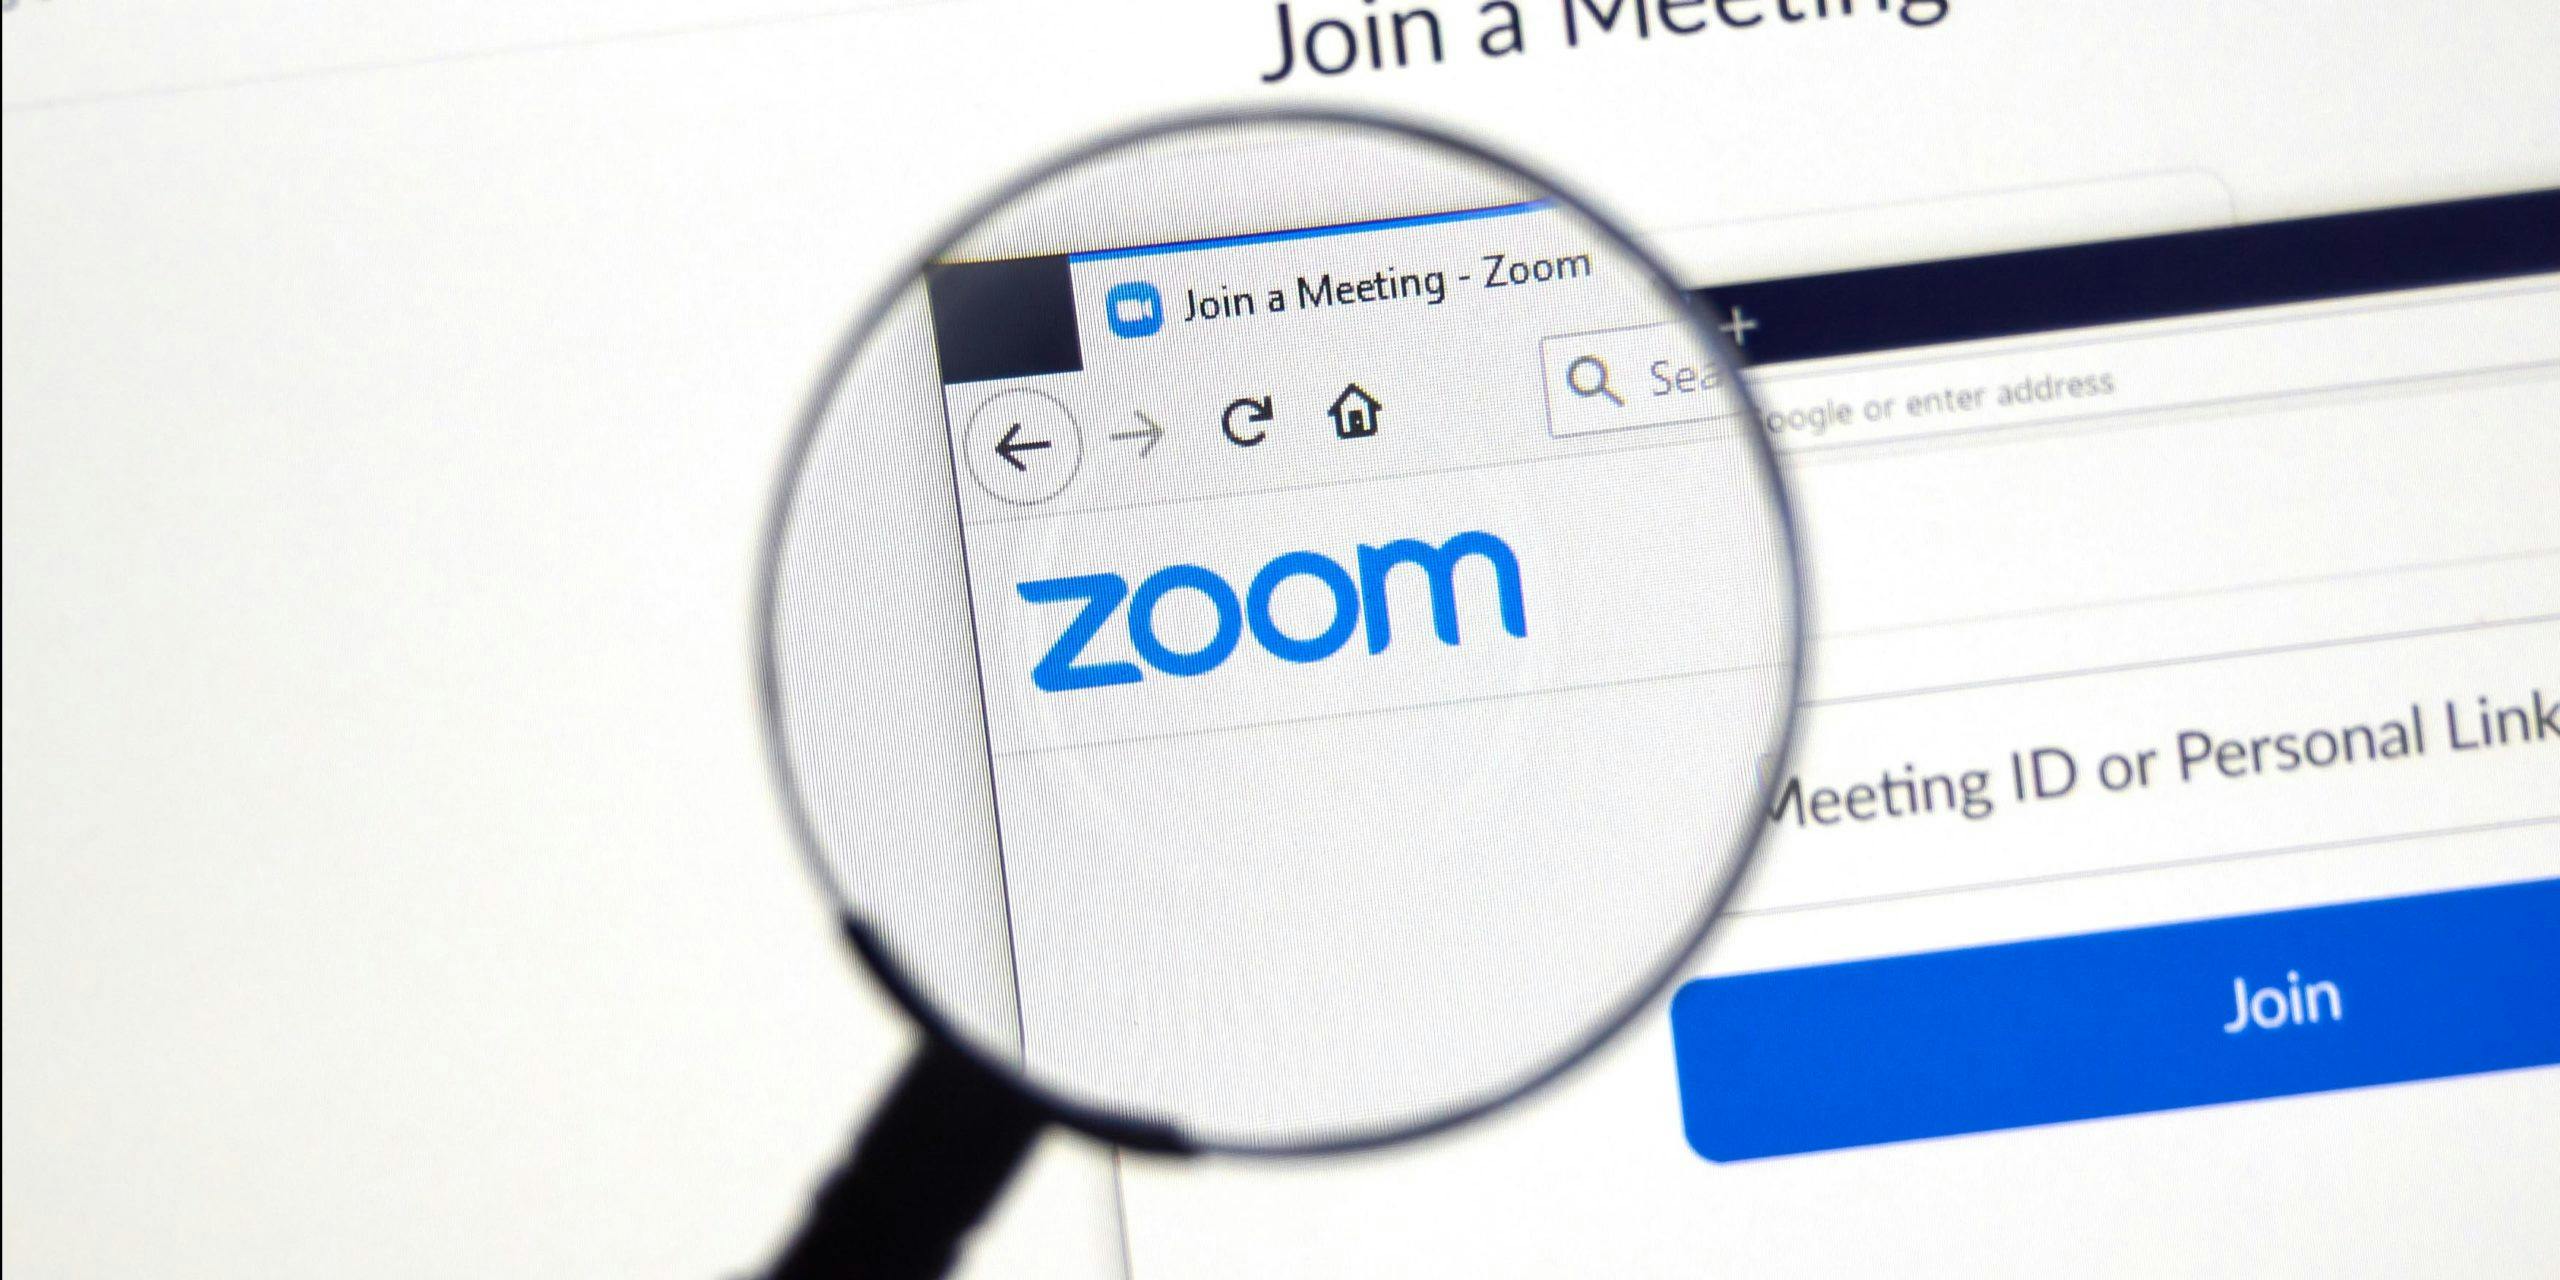 Zoom Security These Are The Security Issues Around The Video Software